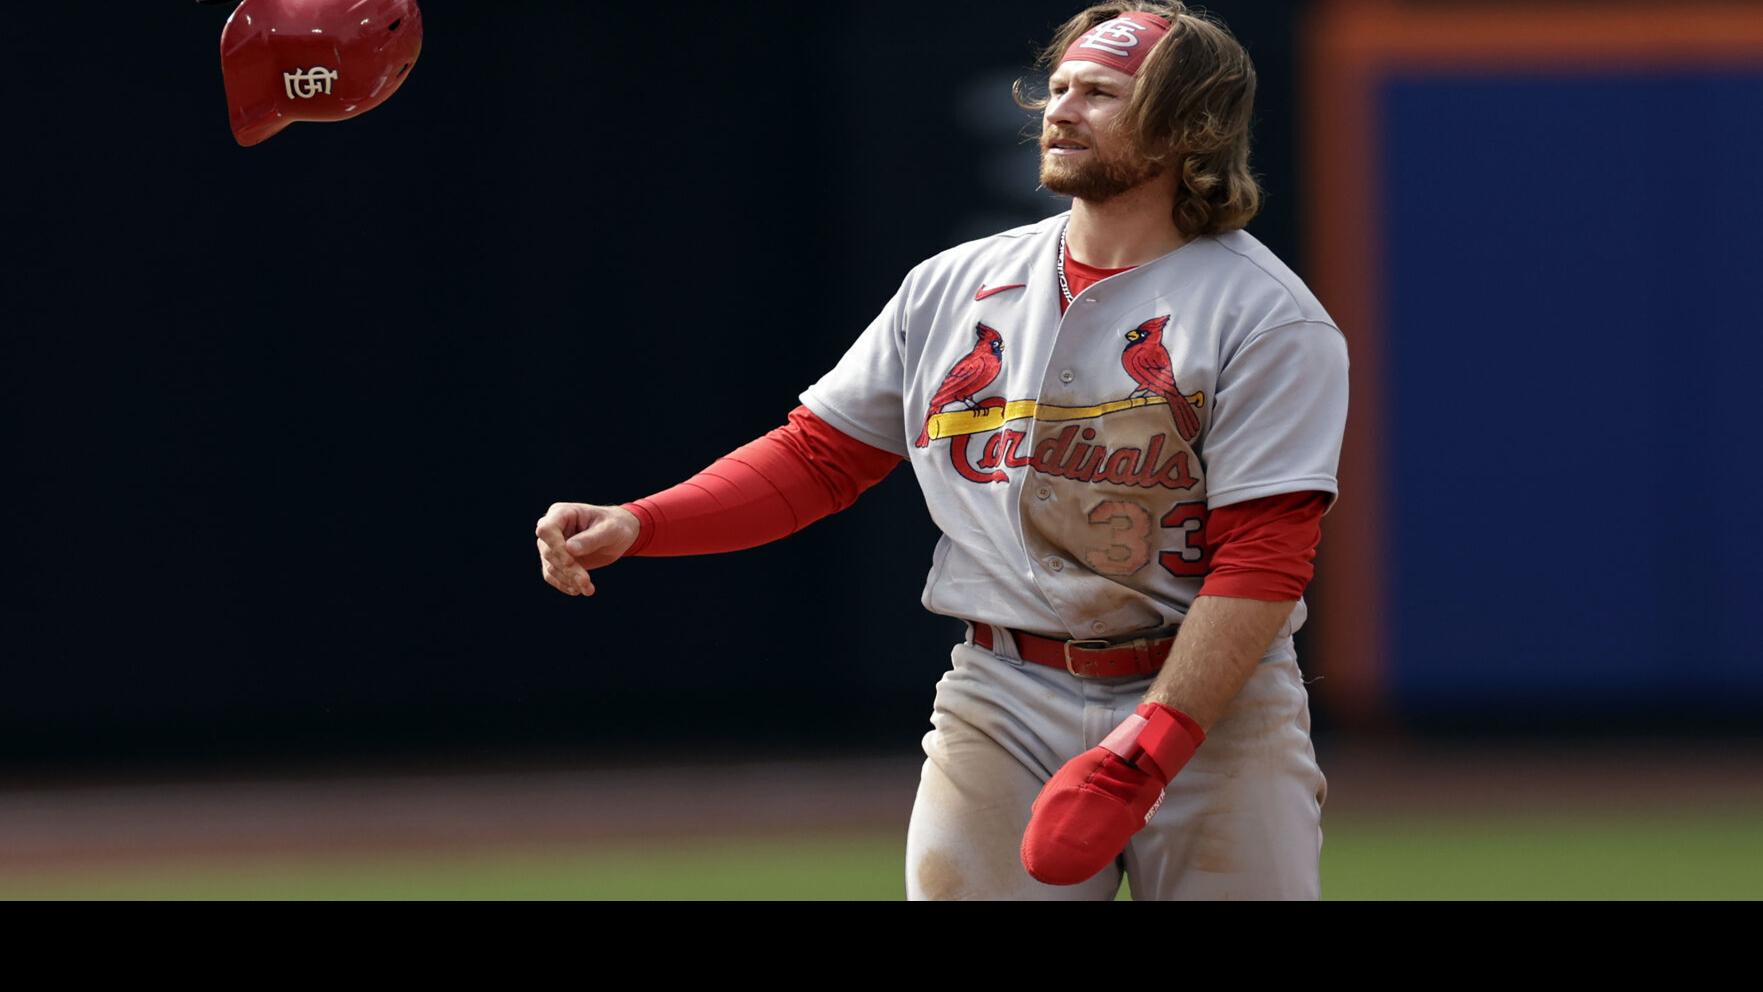 Donovan returns to shortstop, bats second, but Cardinals encouraged by how Sosa's ankle feels